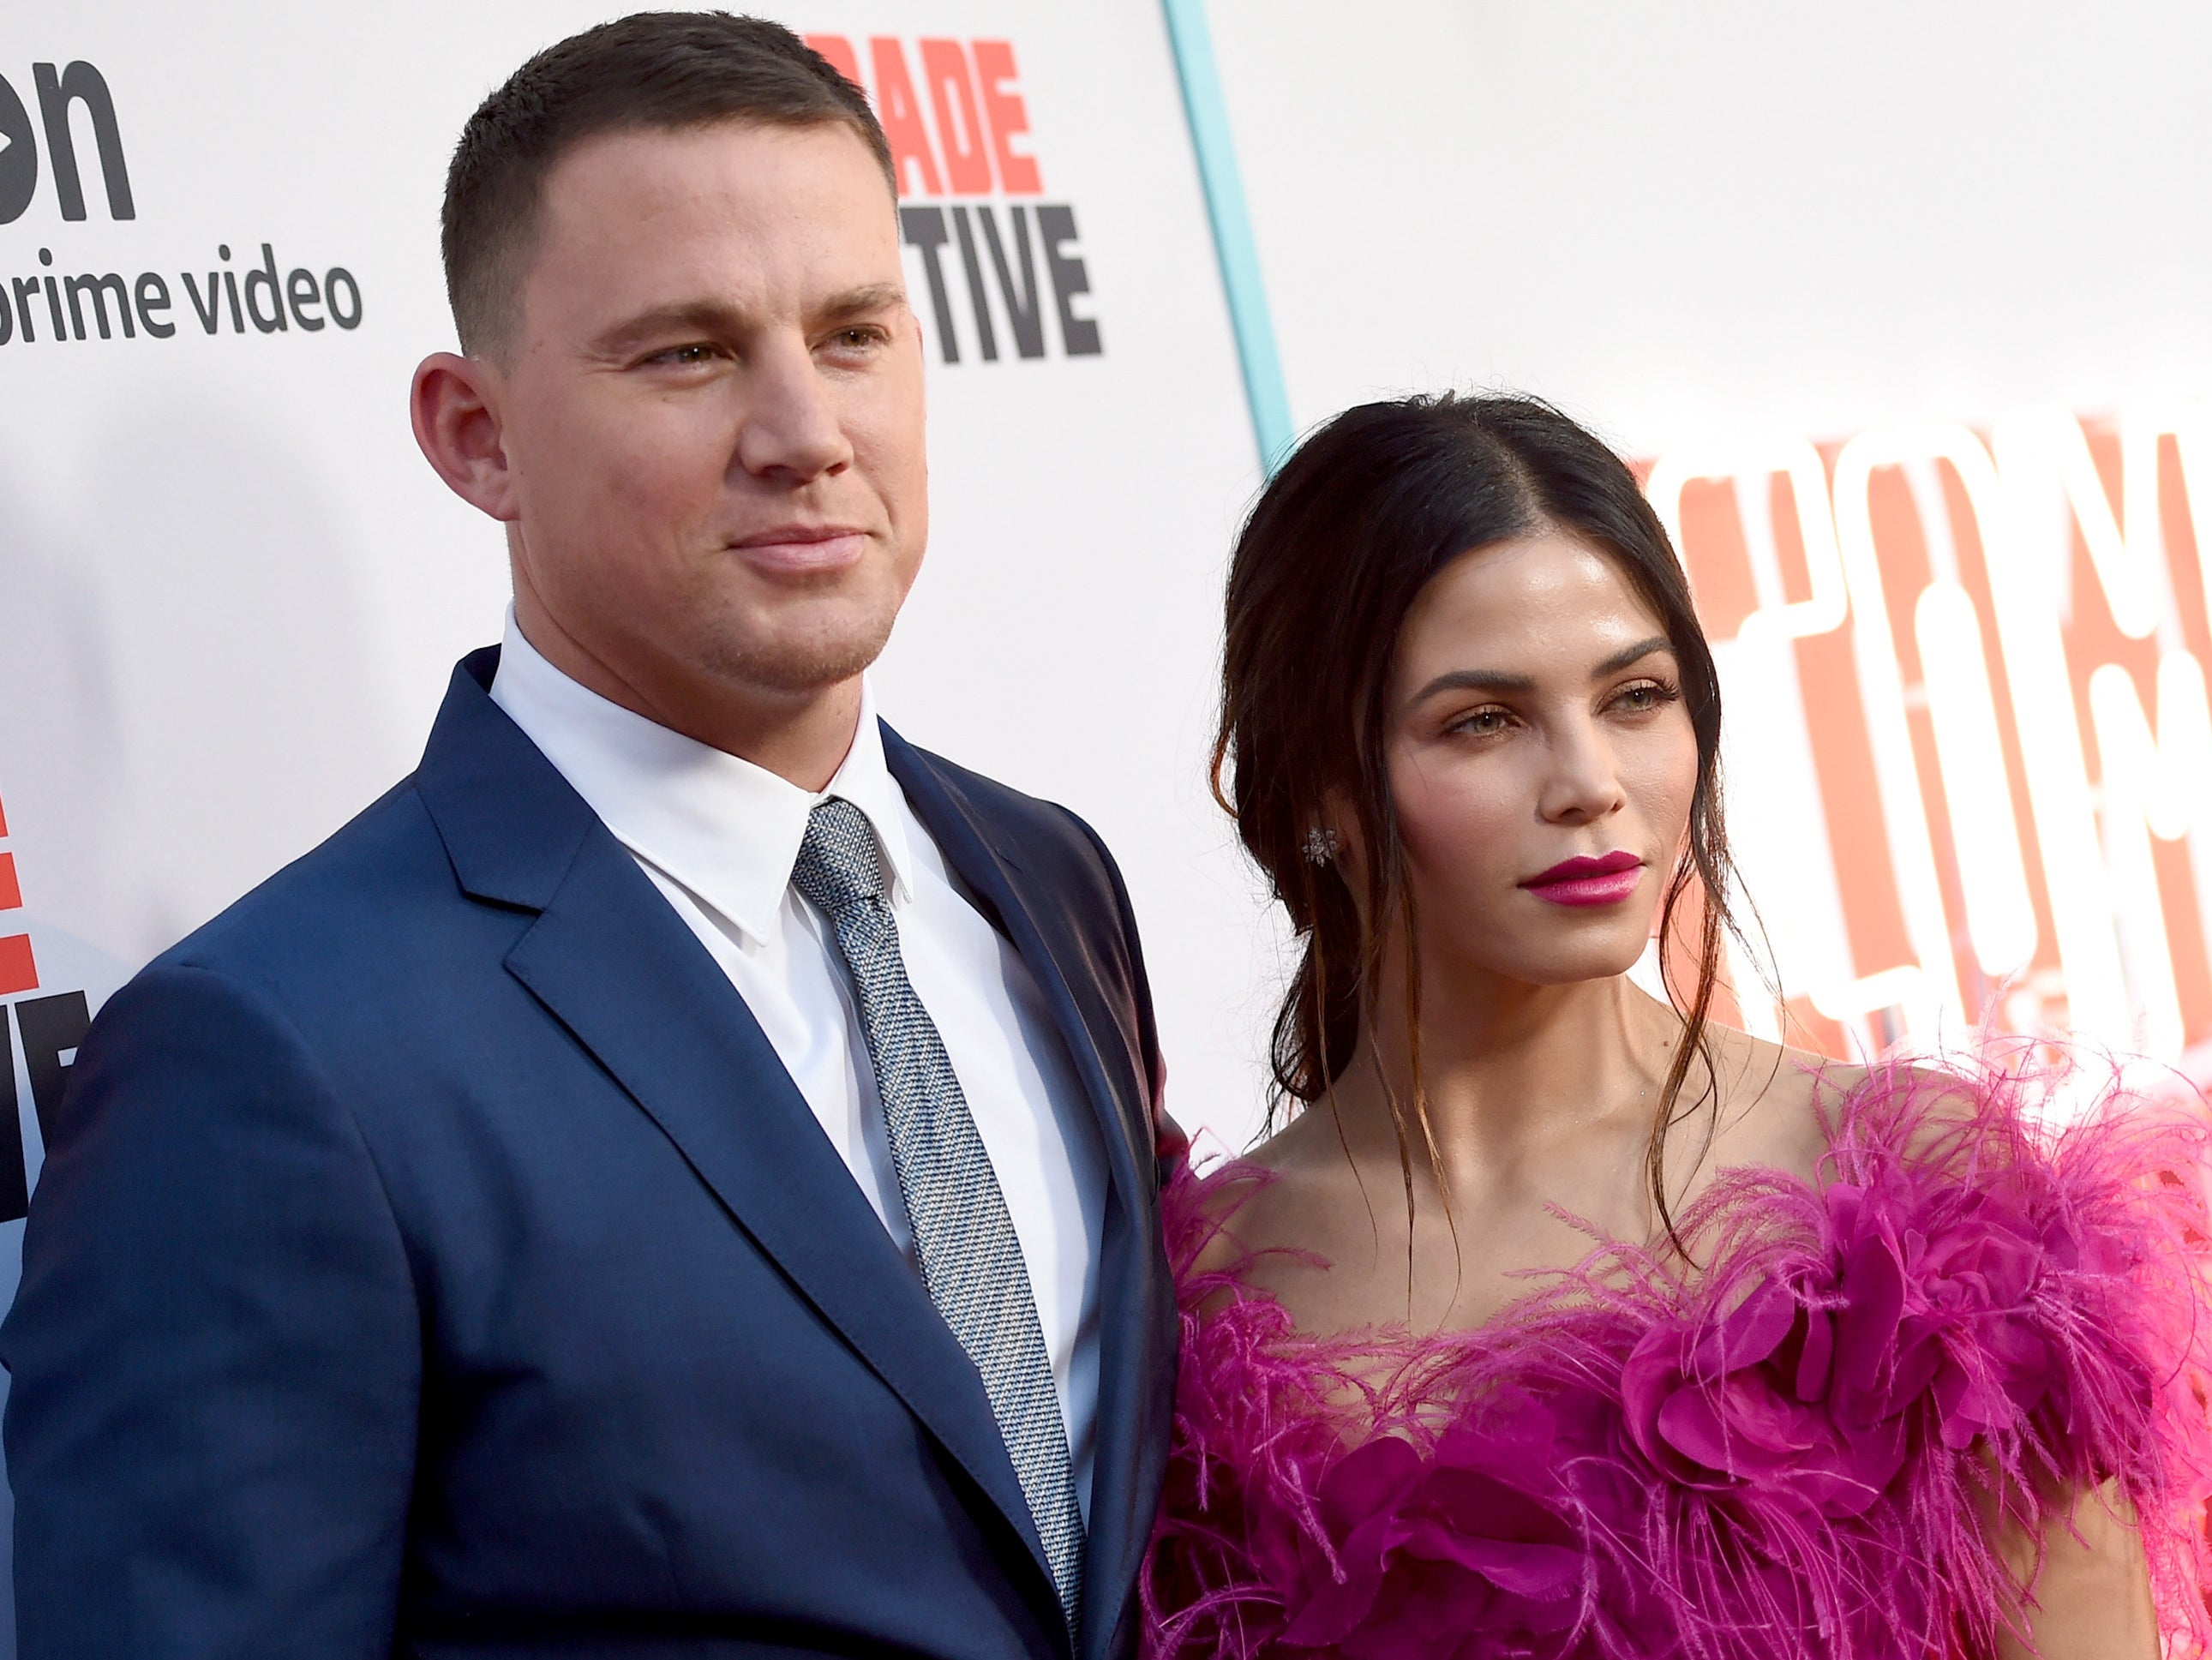 Jenna and Channing attend an event together before their split